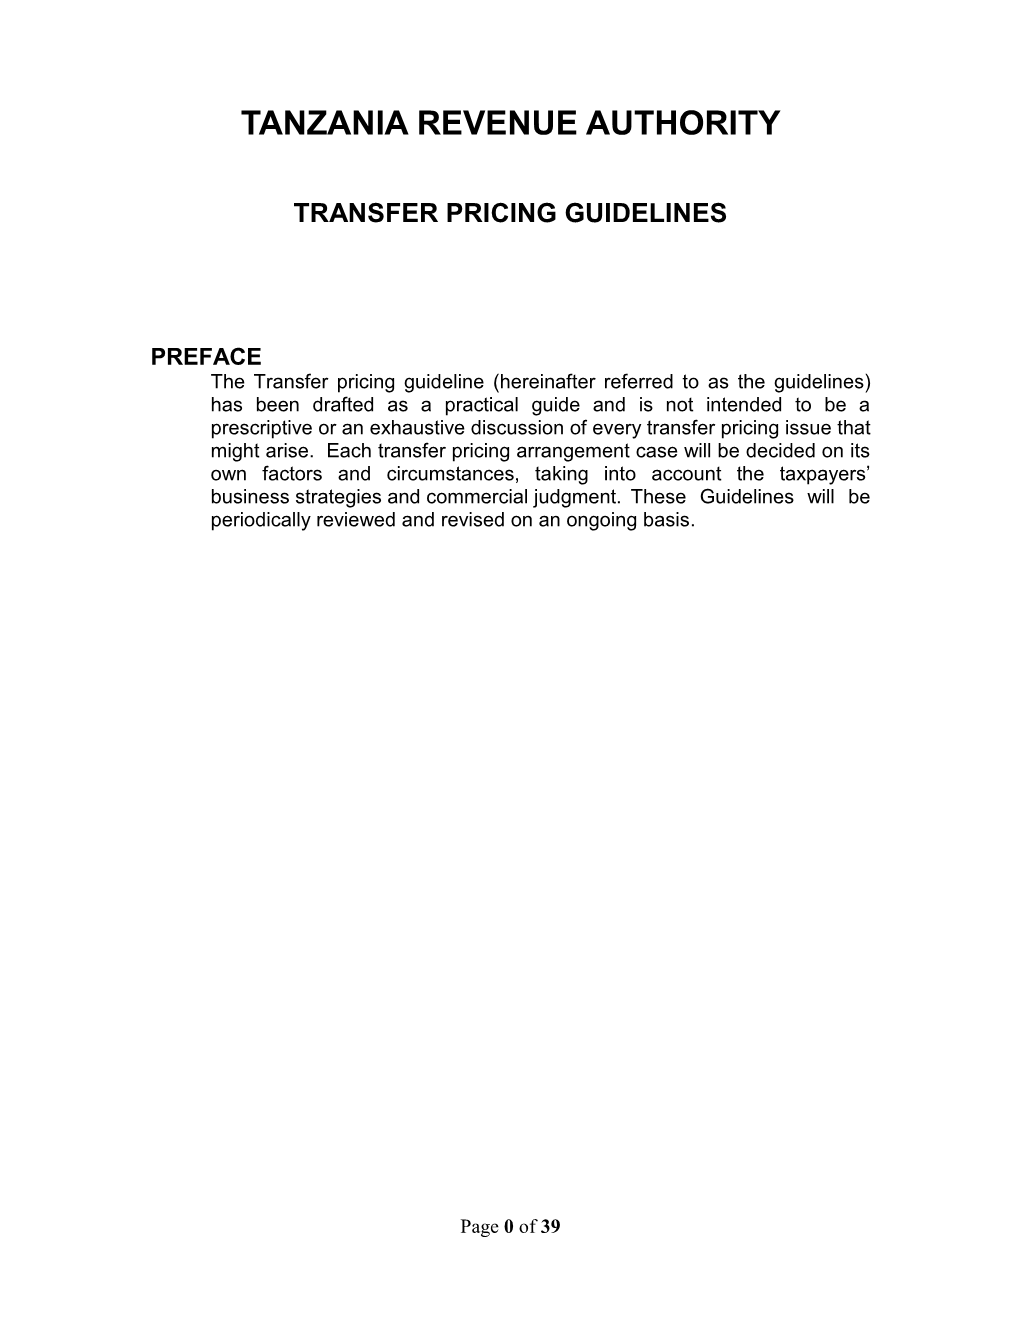 Transfer Pricing Guidelines